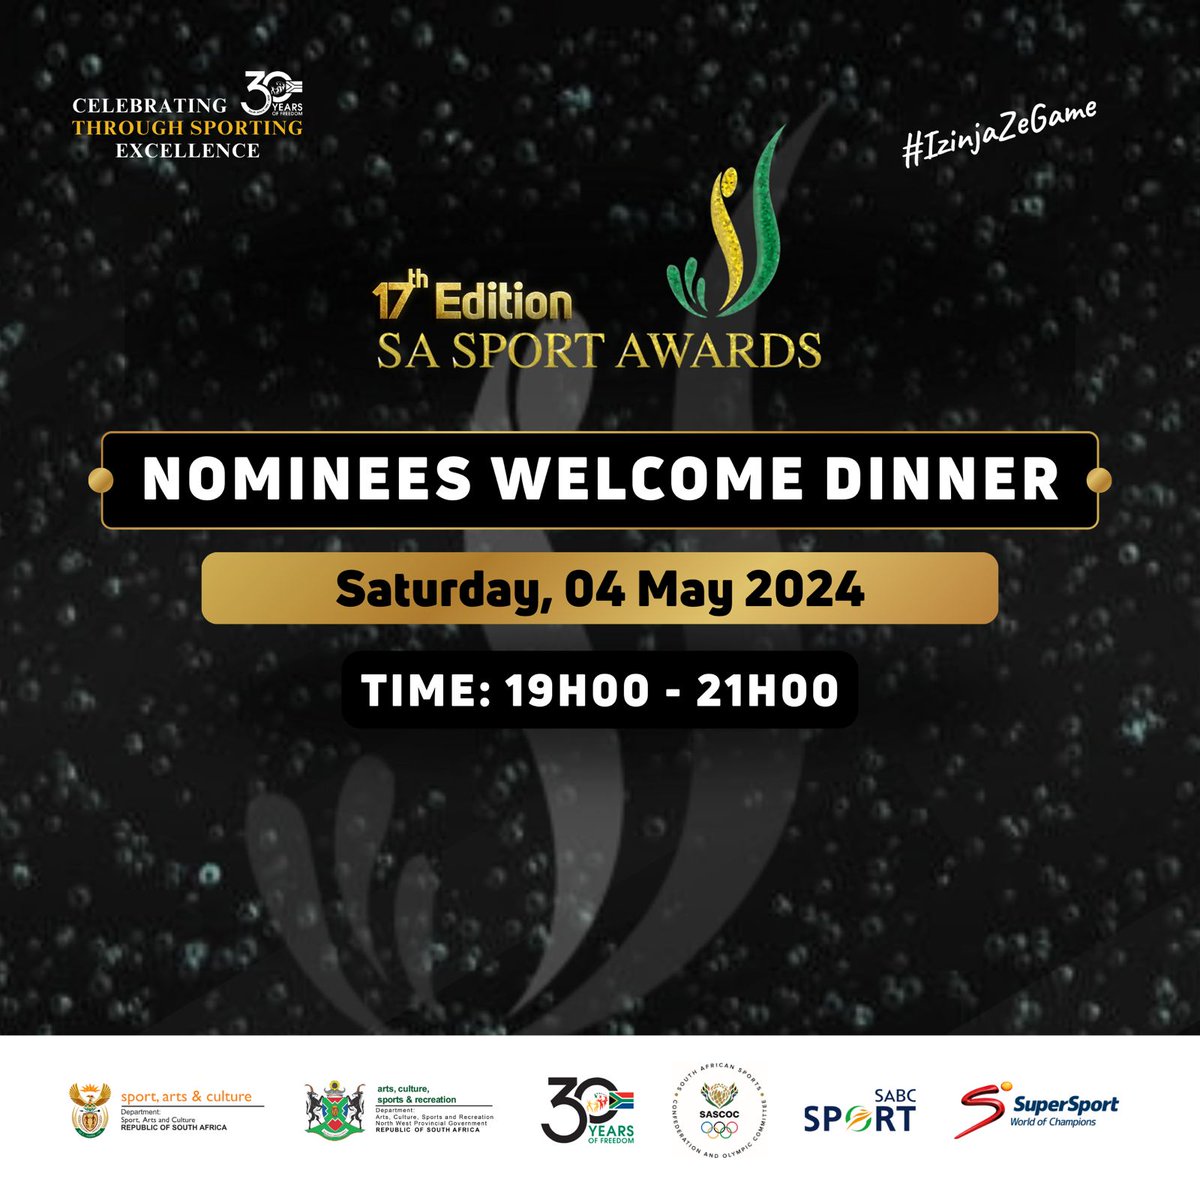 Follow our social media channels for exclusive updates on the Nominees Welcome Dinner, taking place on 04 May 2024 from 19h00-21h00.

We're counting down to the South African Sport Awards! 

#SASA17edition

 #IzinjaZeGame